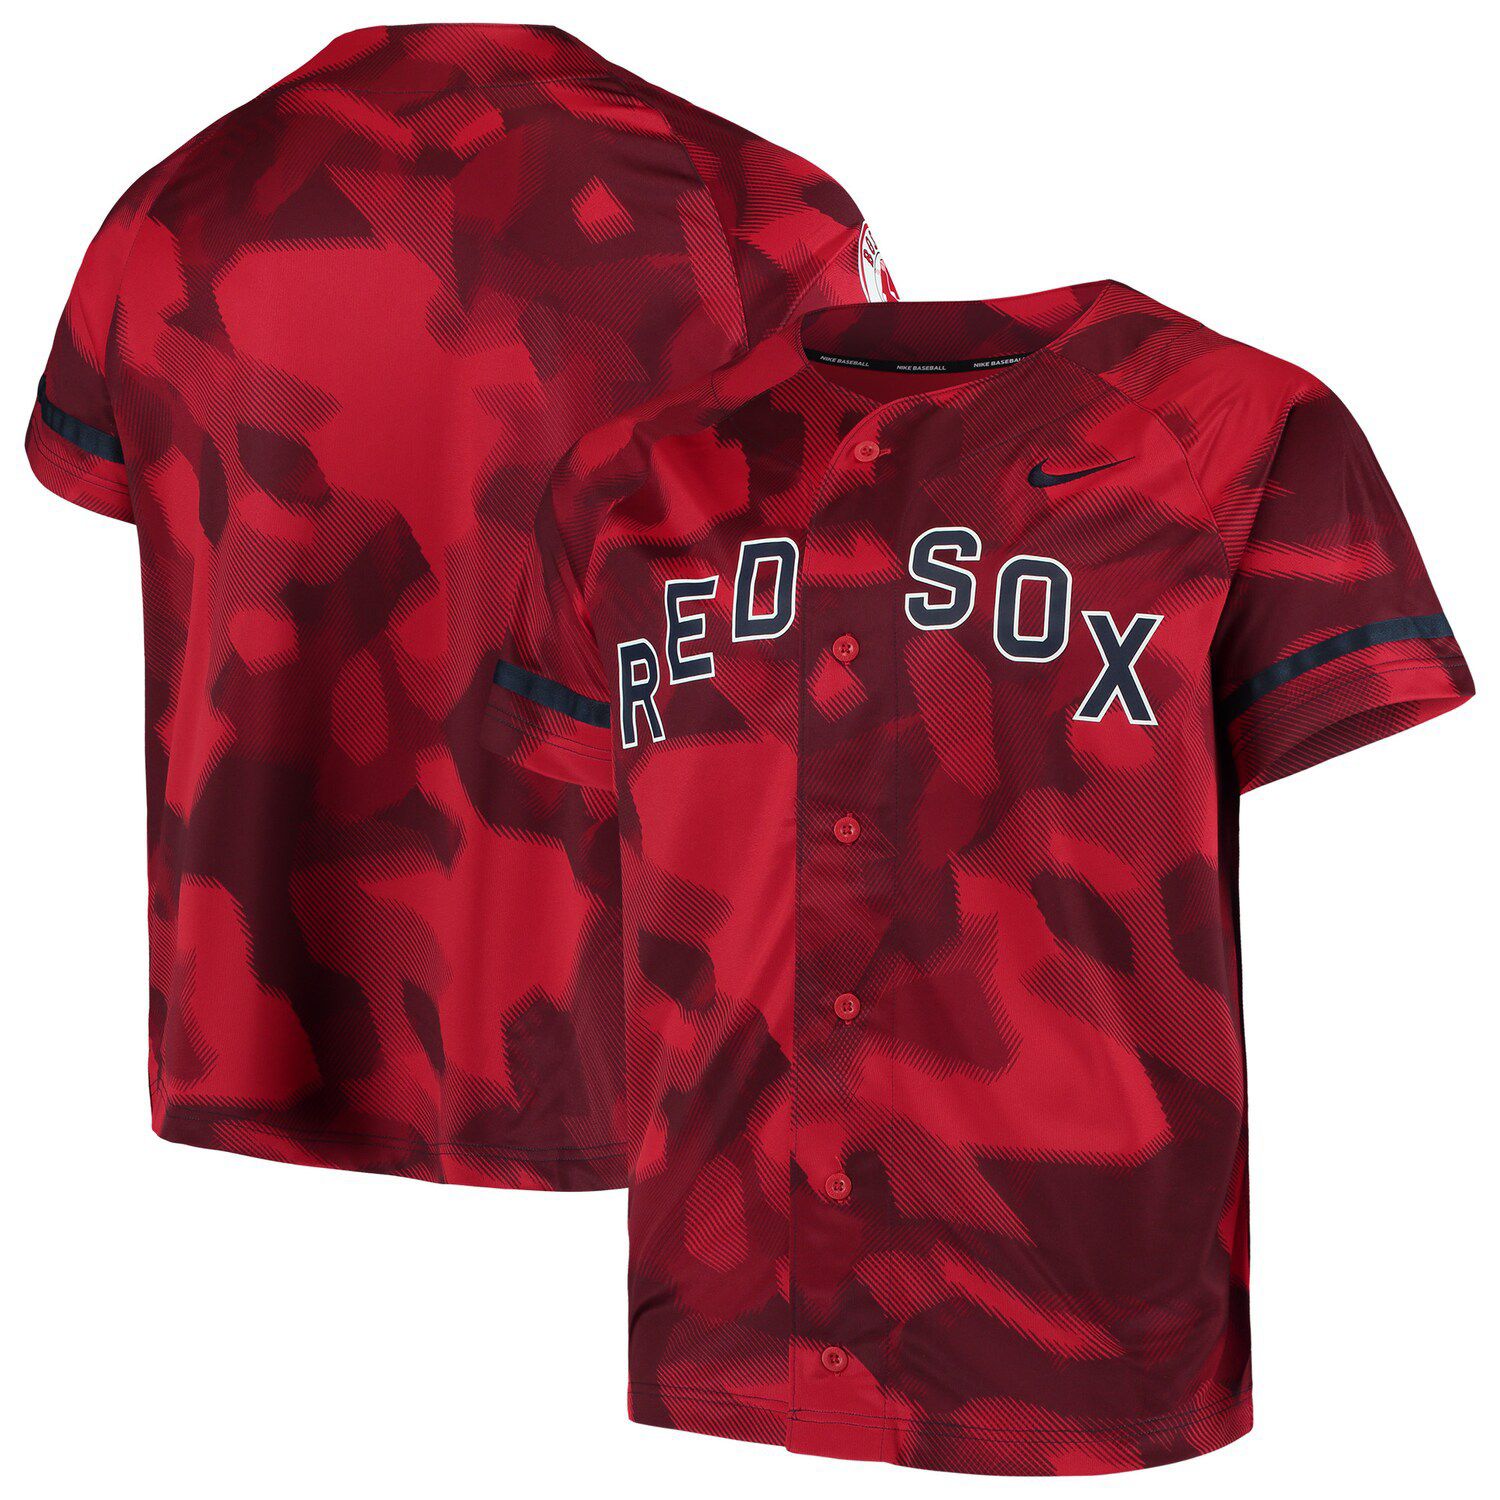 camouflage red sox shirt